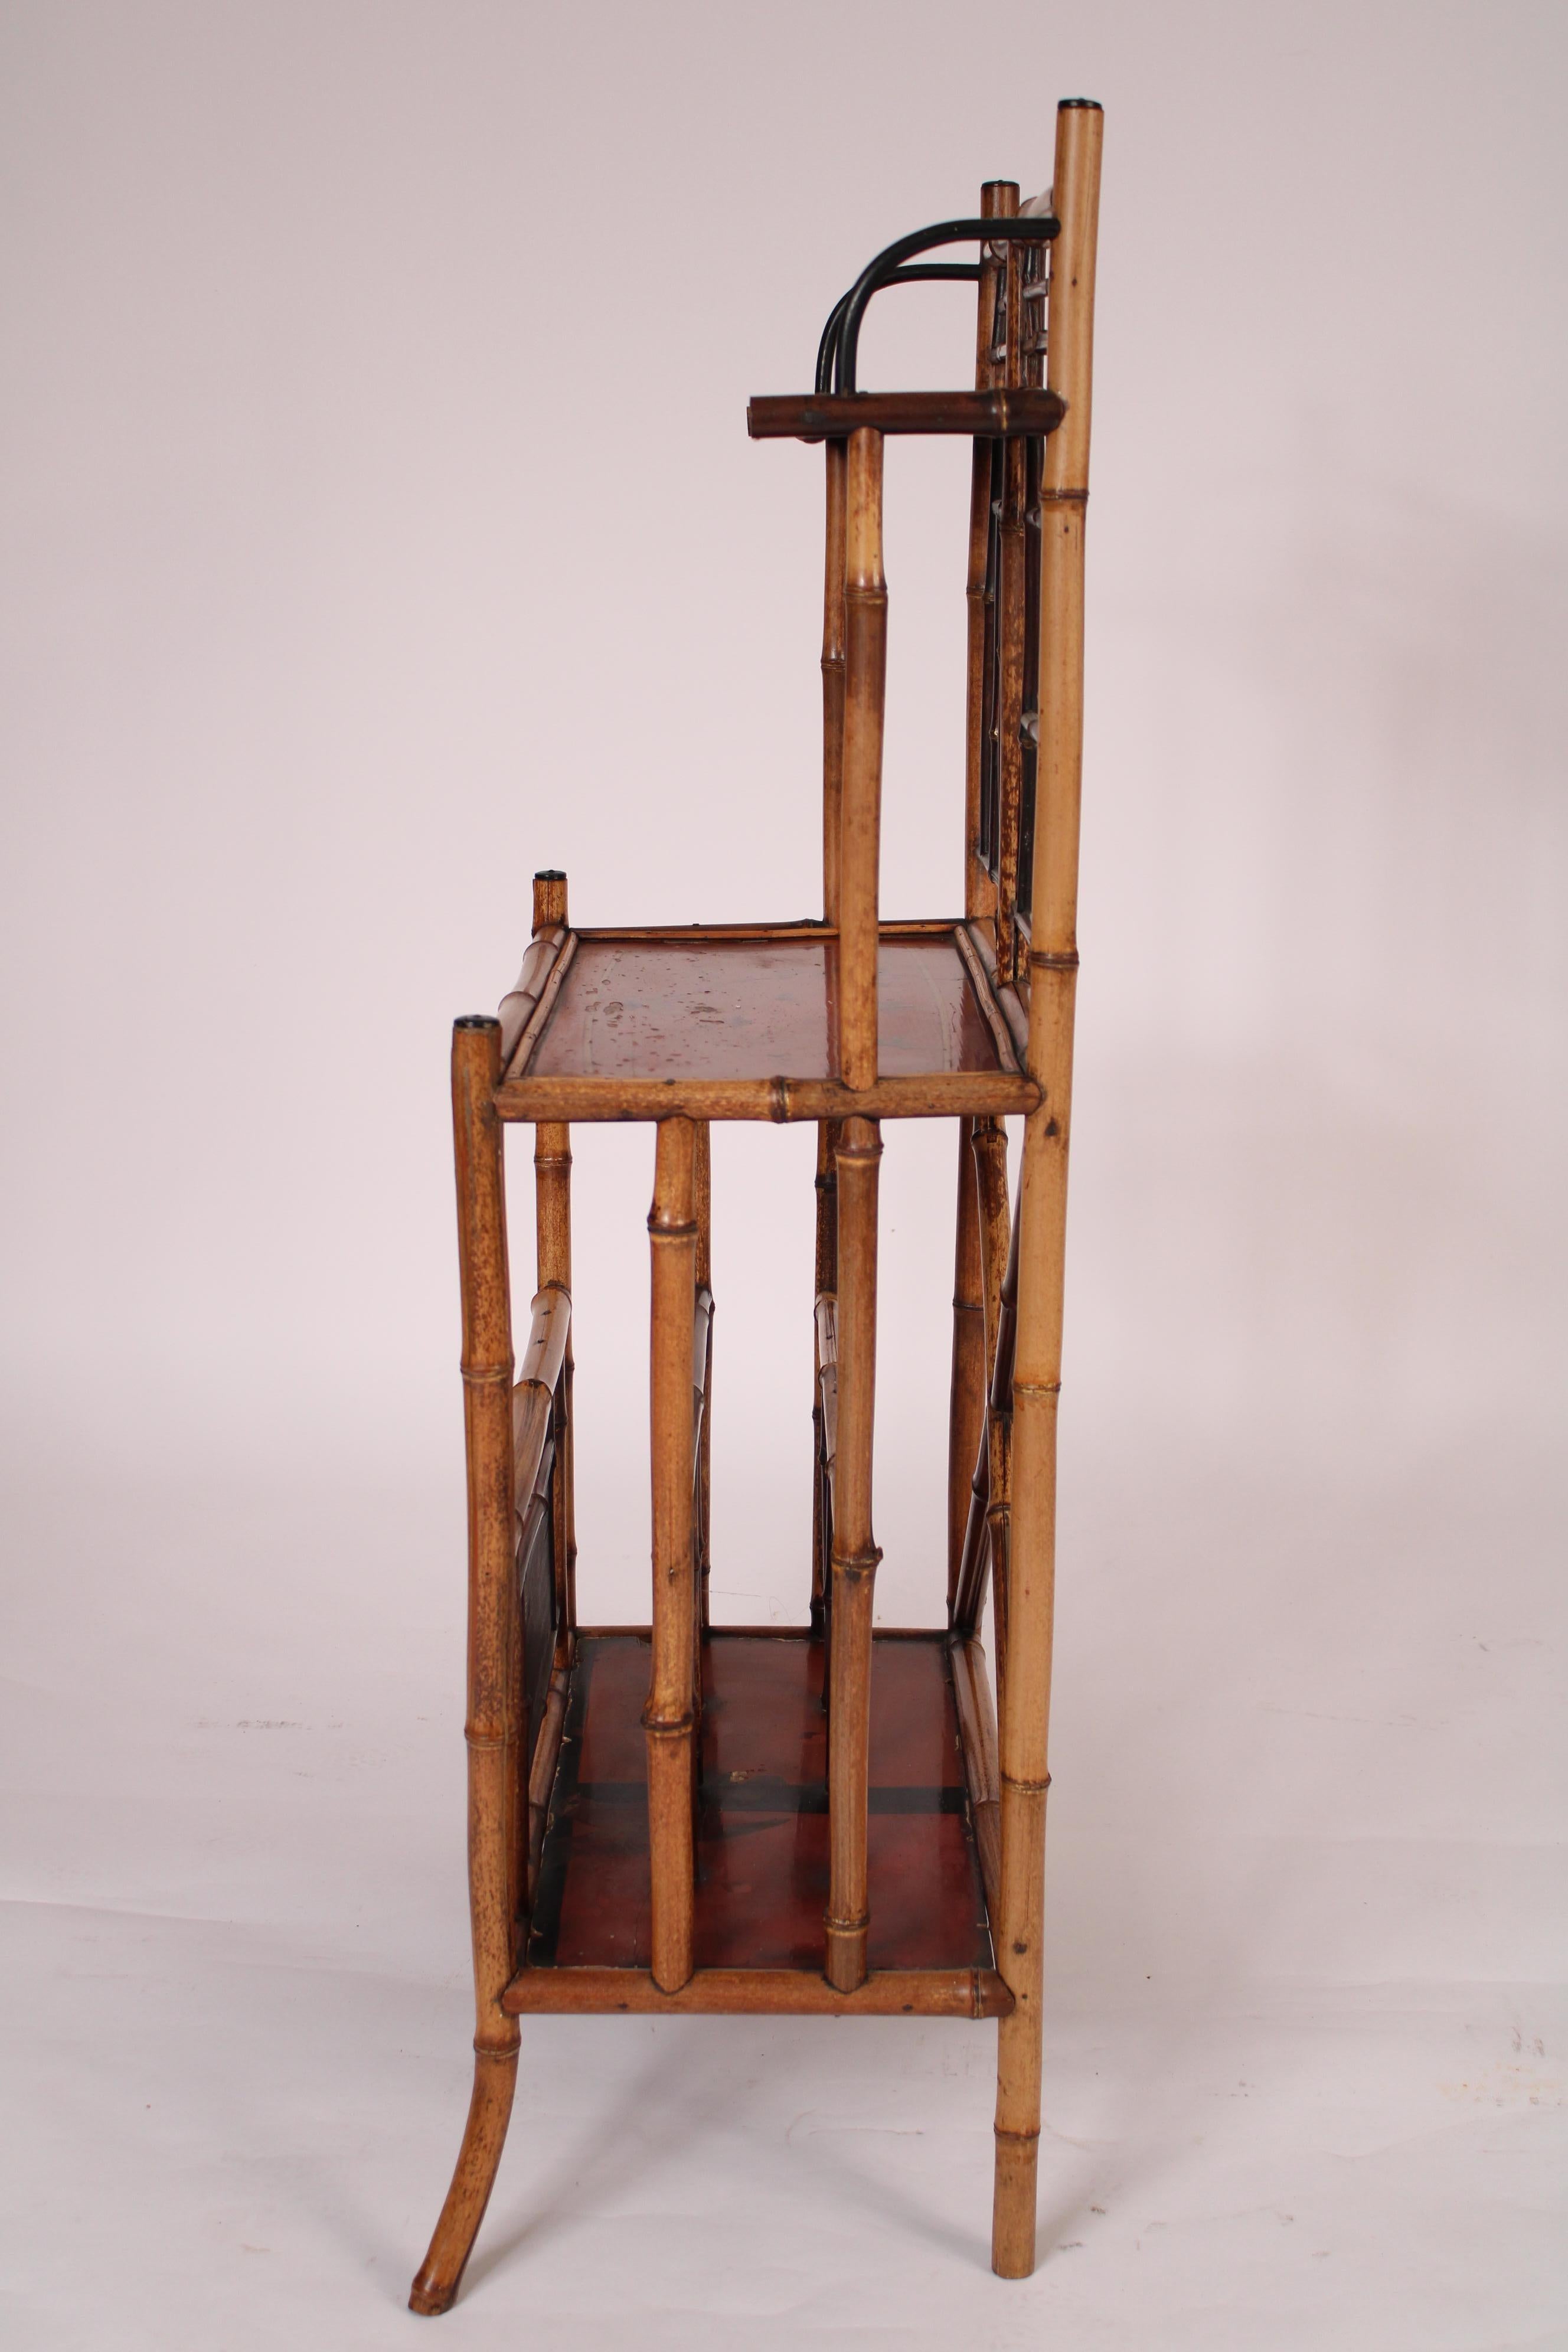 Aesthetic Movement Bamboo and Lacquer Etagere In Good Condition For Sale In Laguna Beach, CA